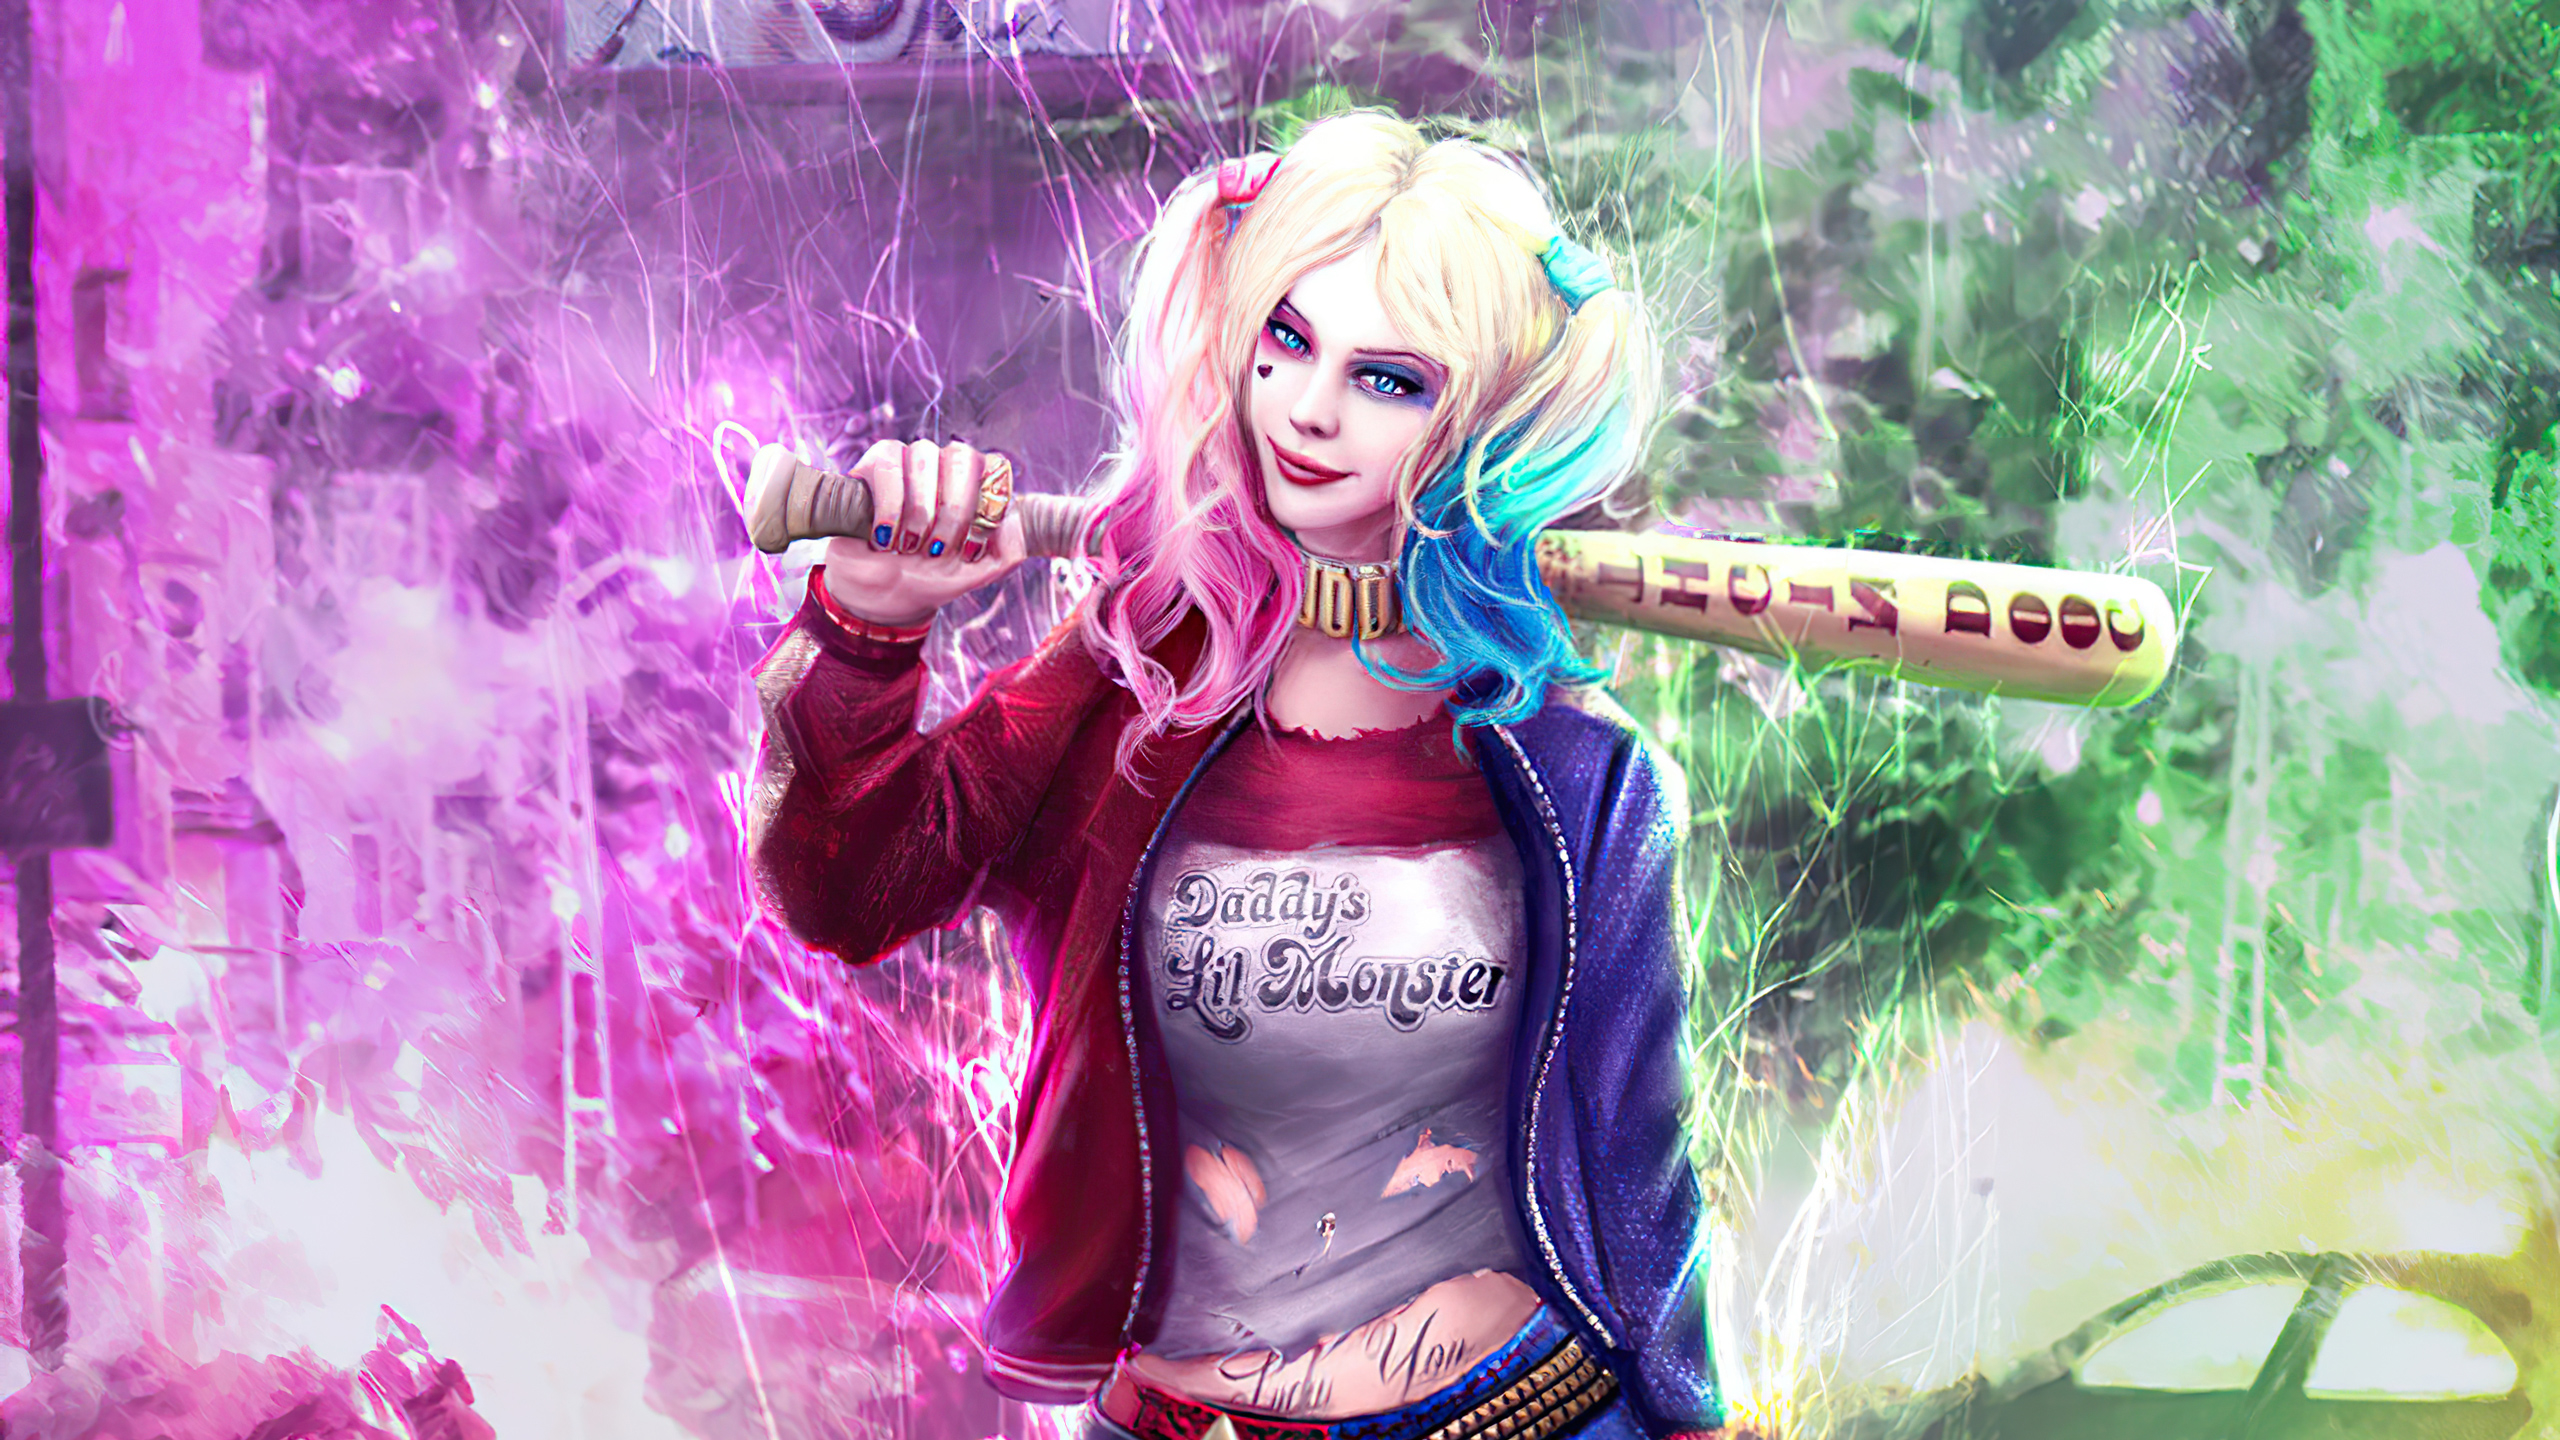 2560x108020 Harley Quinn New Fan Art 2560x108020 Resolution Wallpaper, HD  Superheroes 4K Wallpapers, Images, Photos and Background - Wallpapers Den